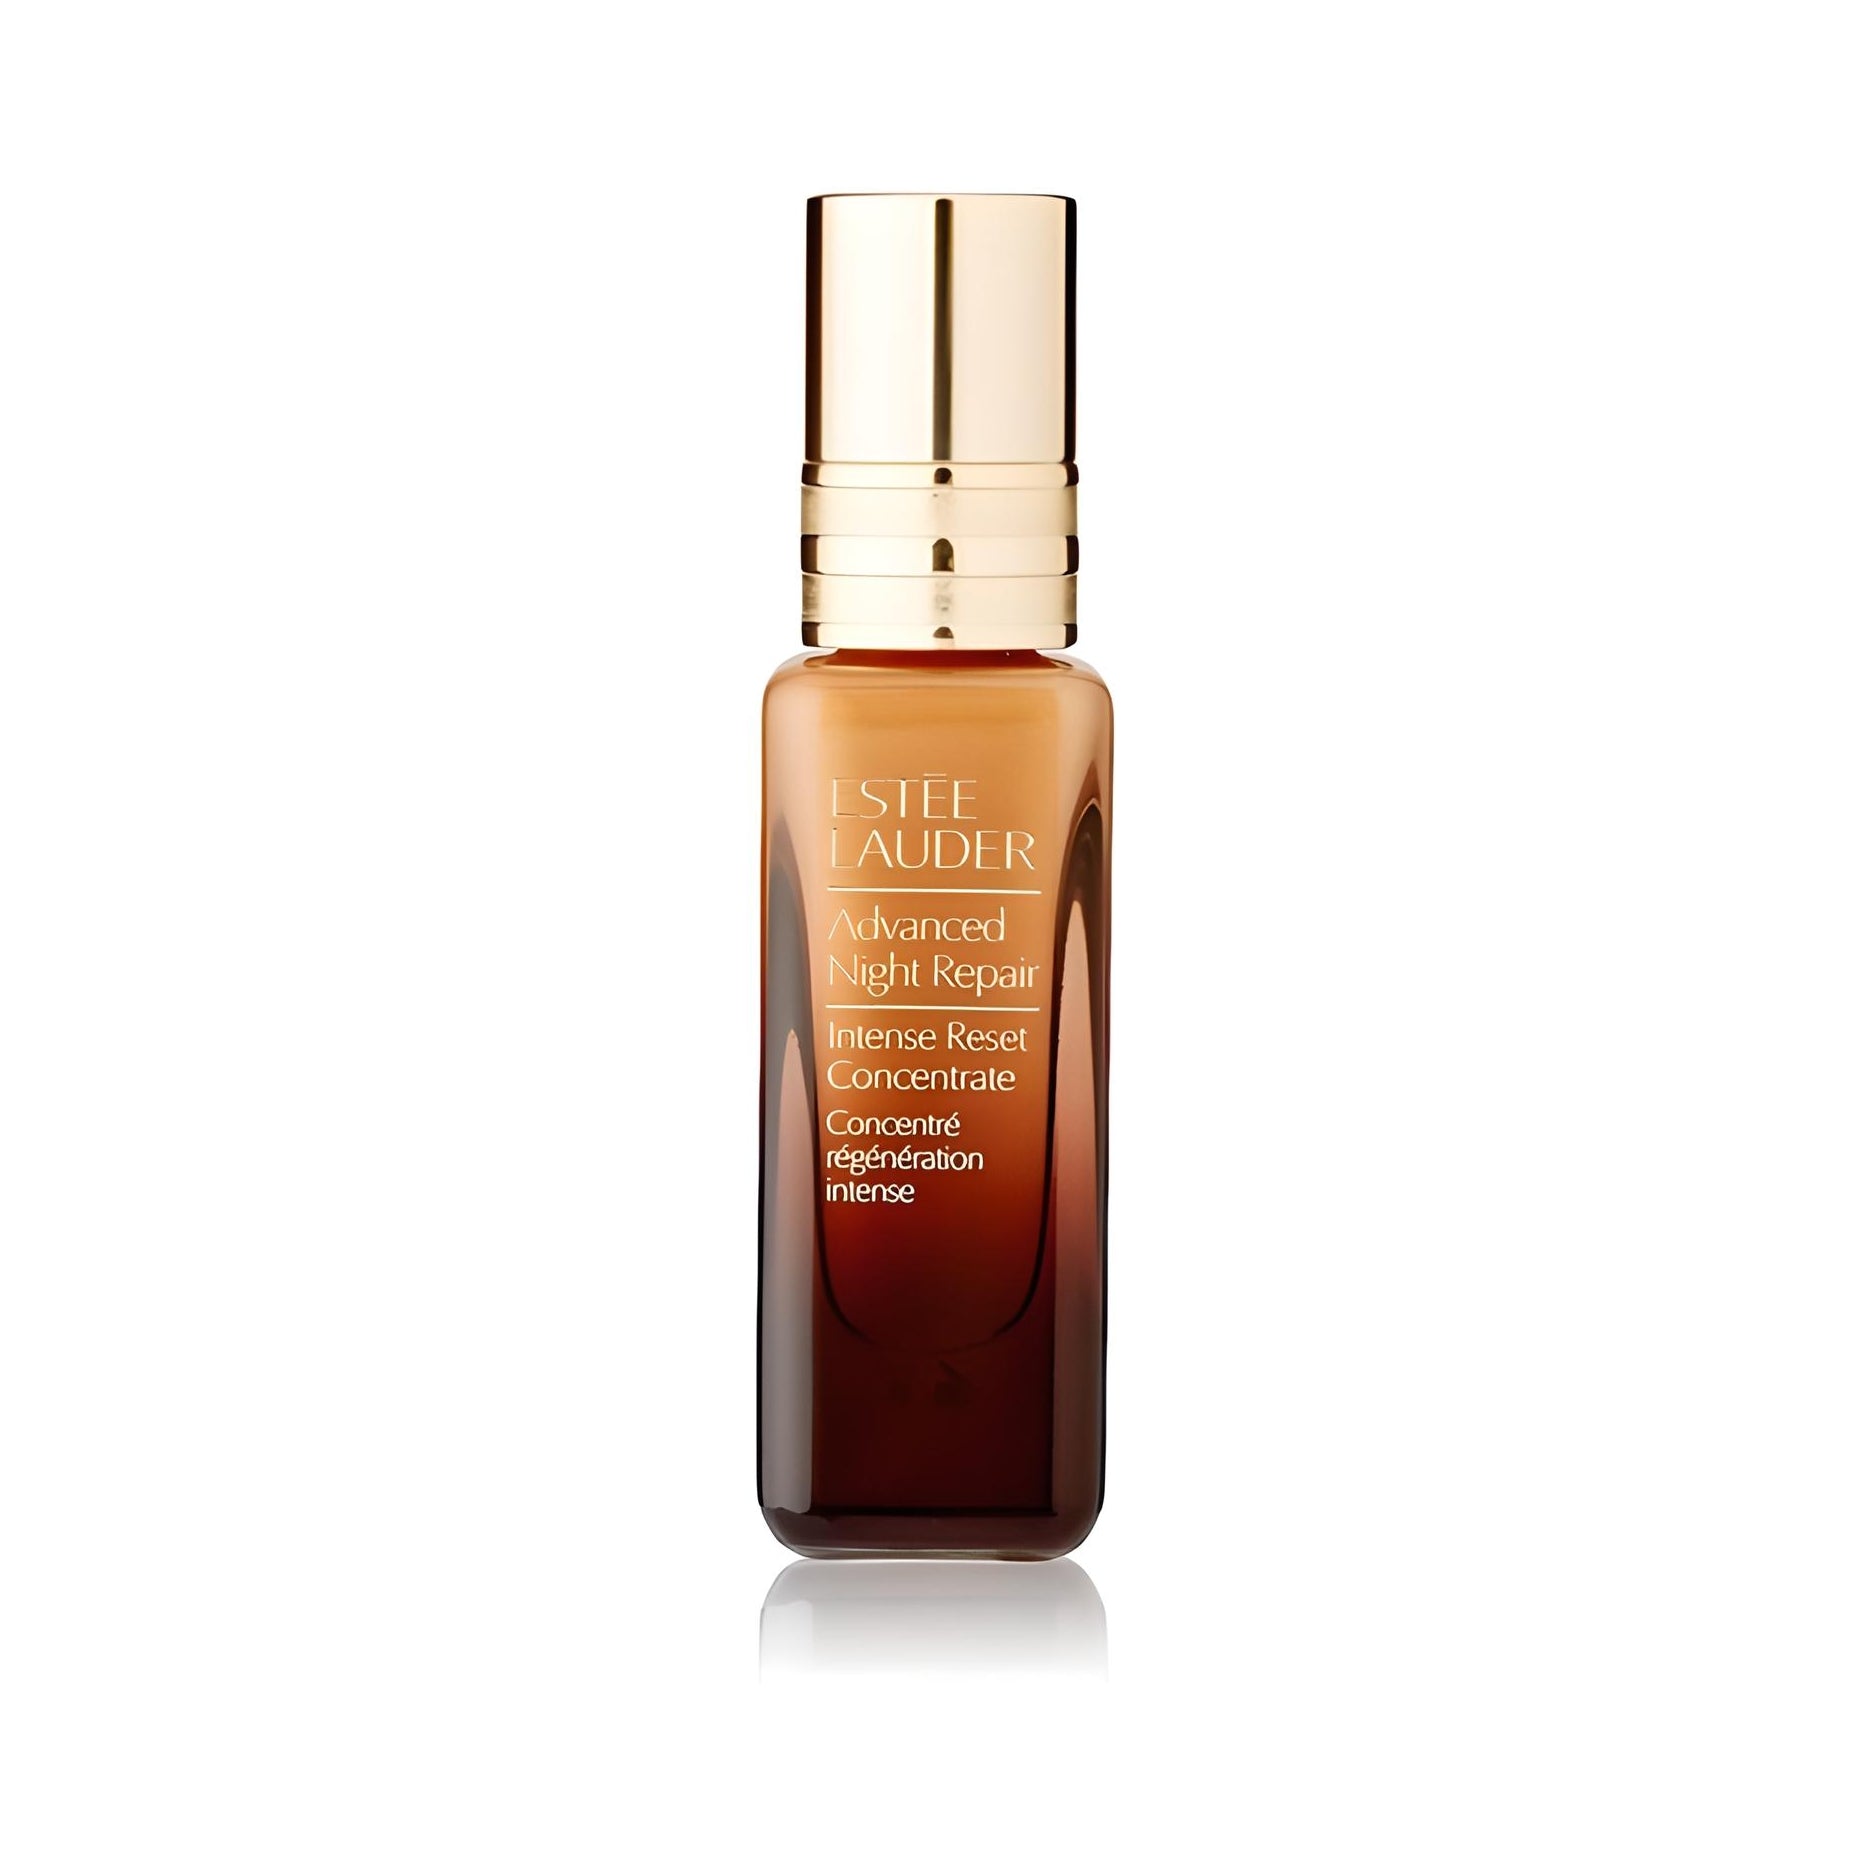 ADVANCED NIGHT REPAIR intense reset concentrate